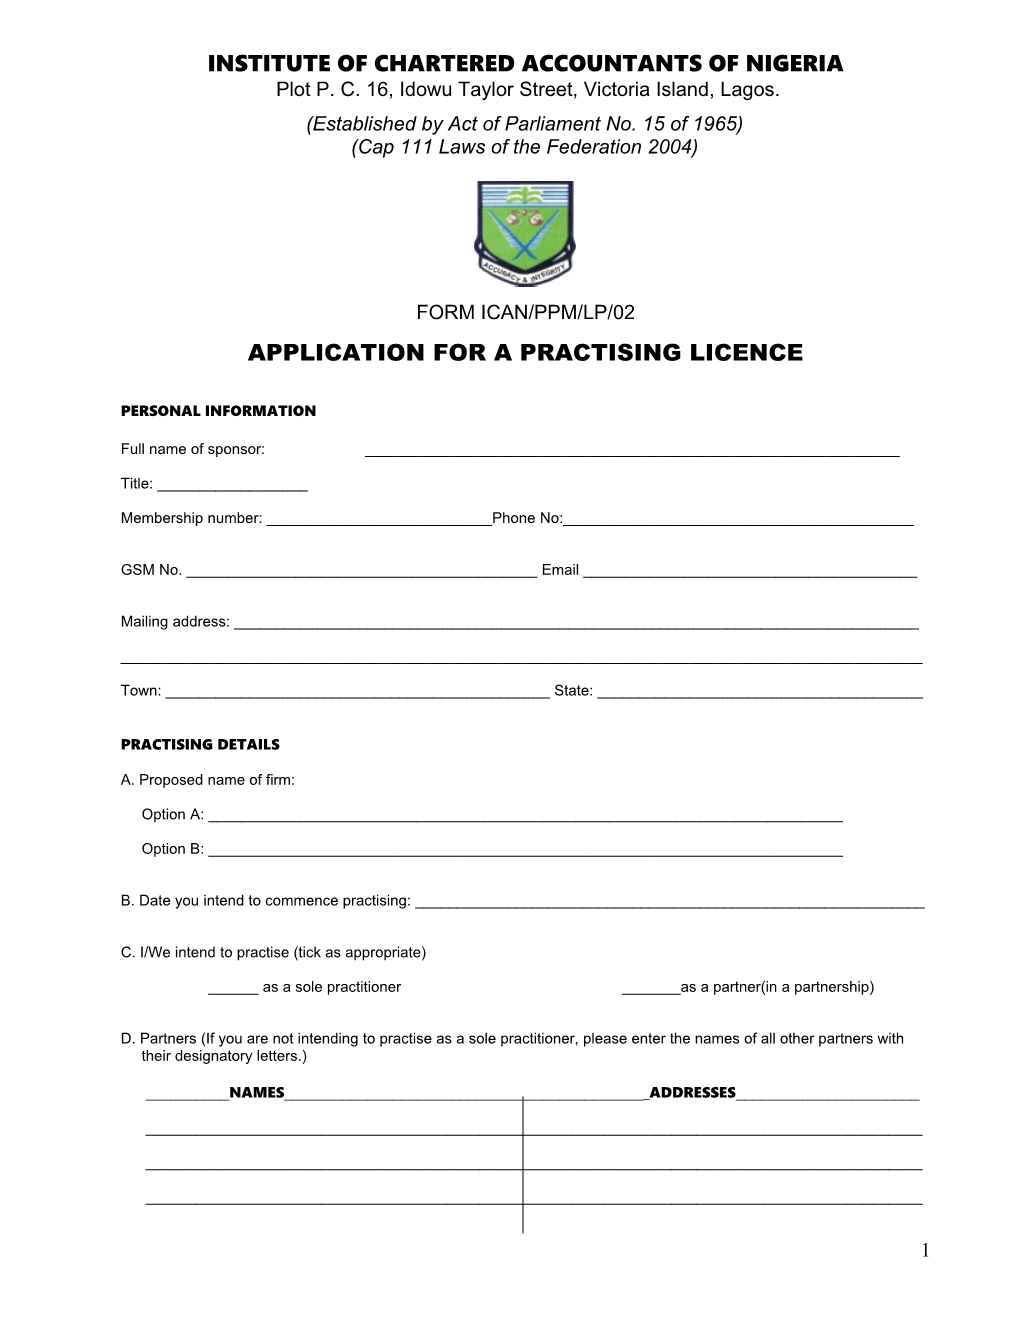 Application for a Practising Certificate